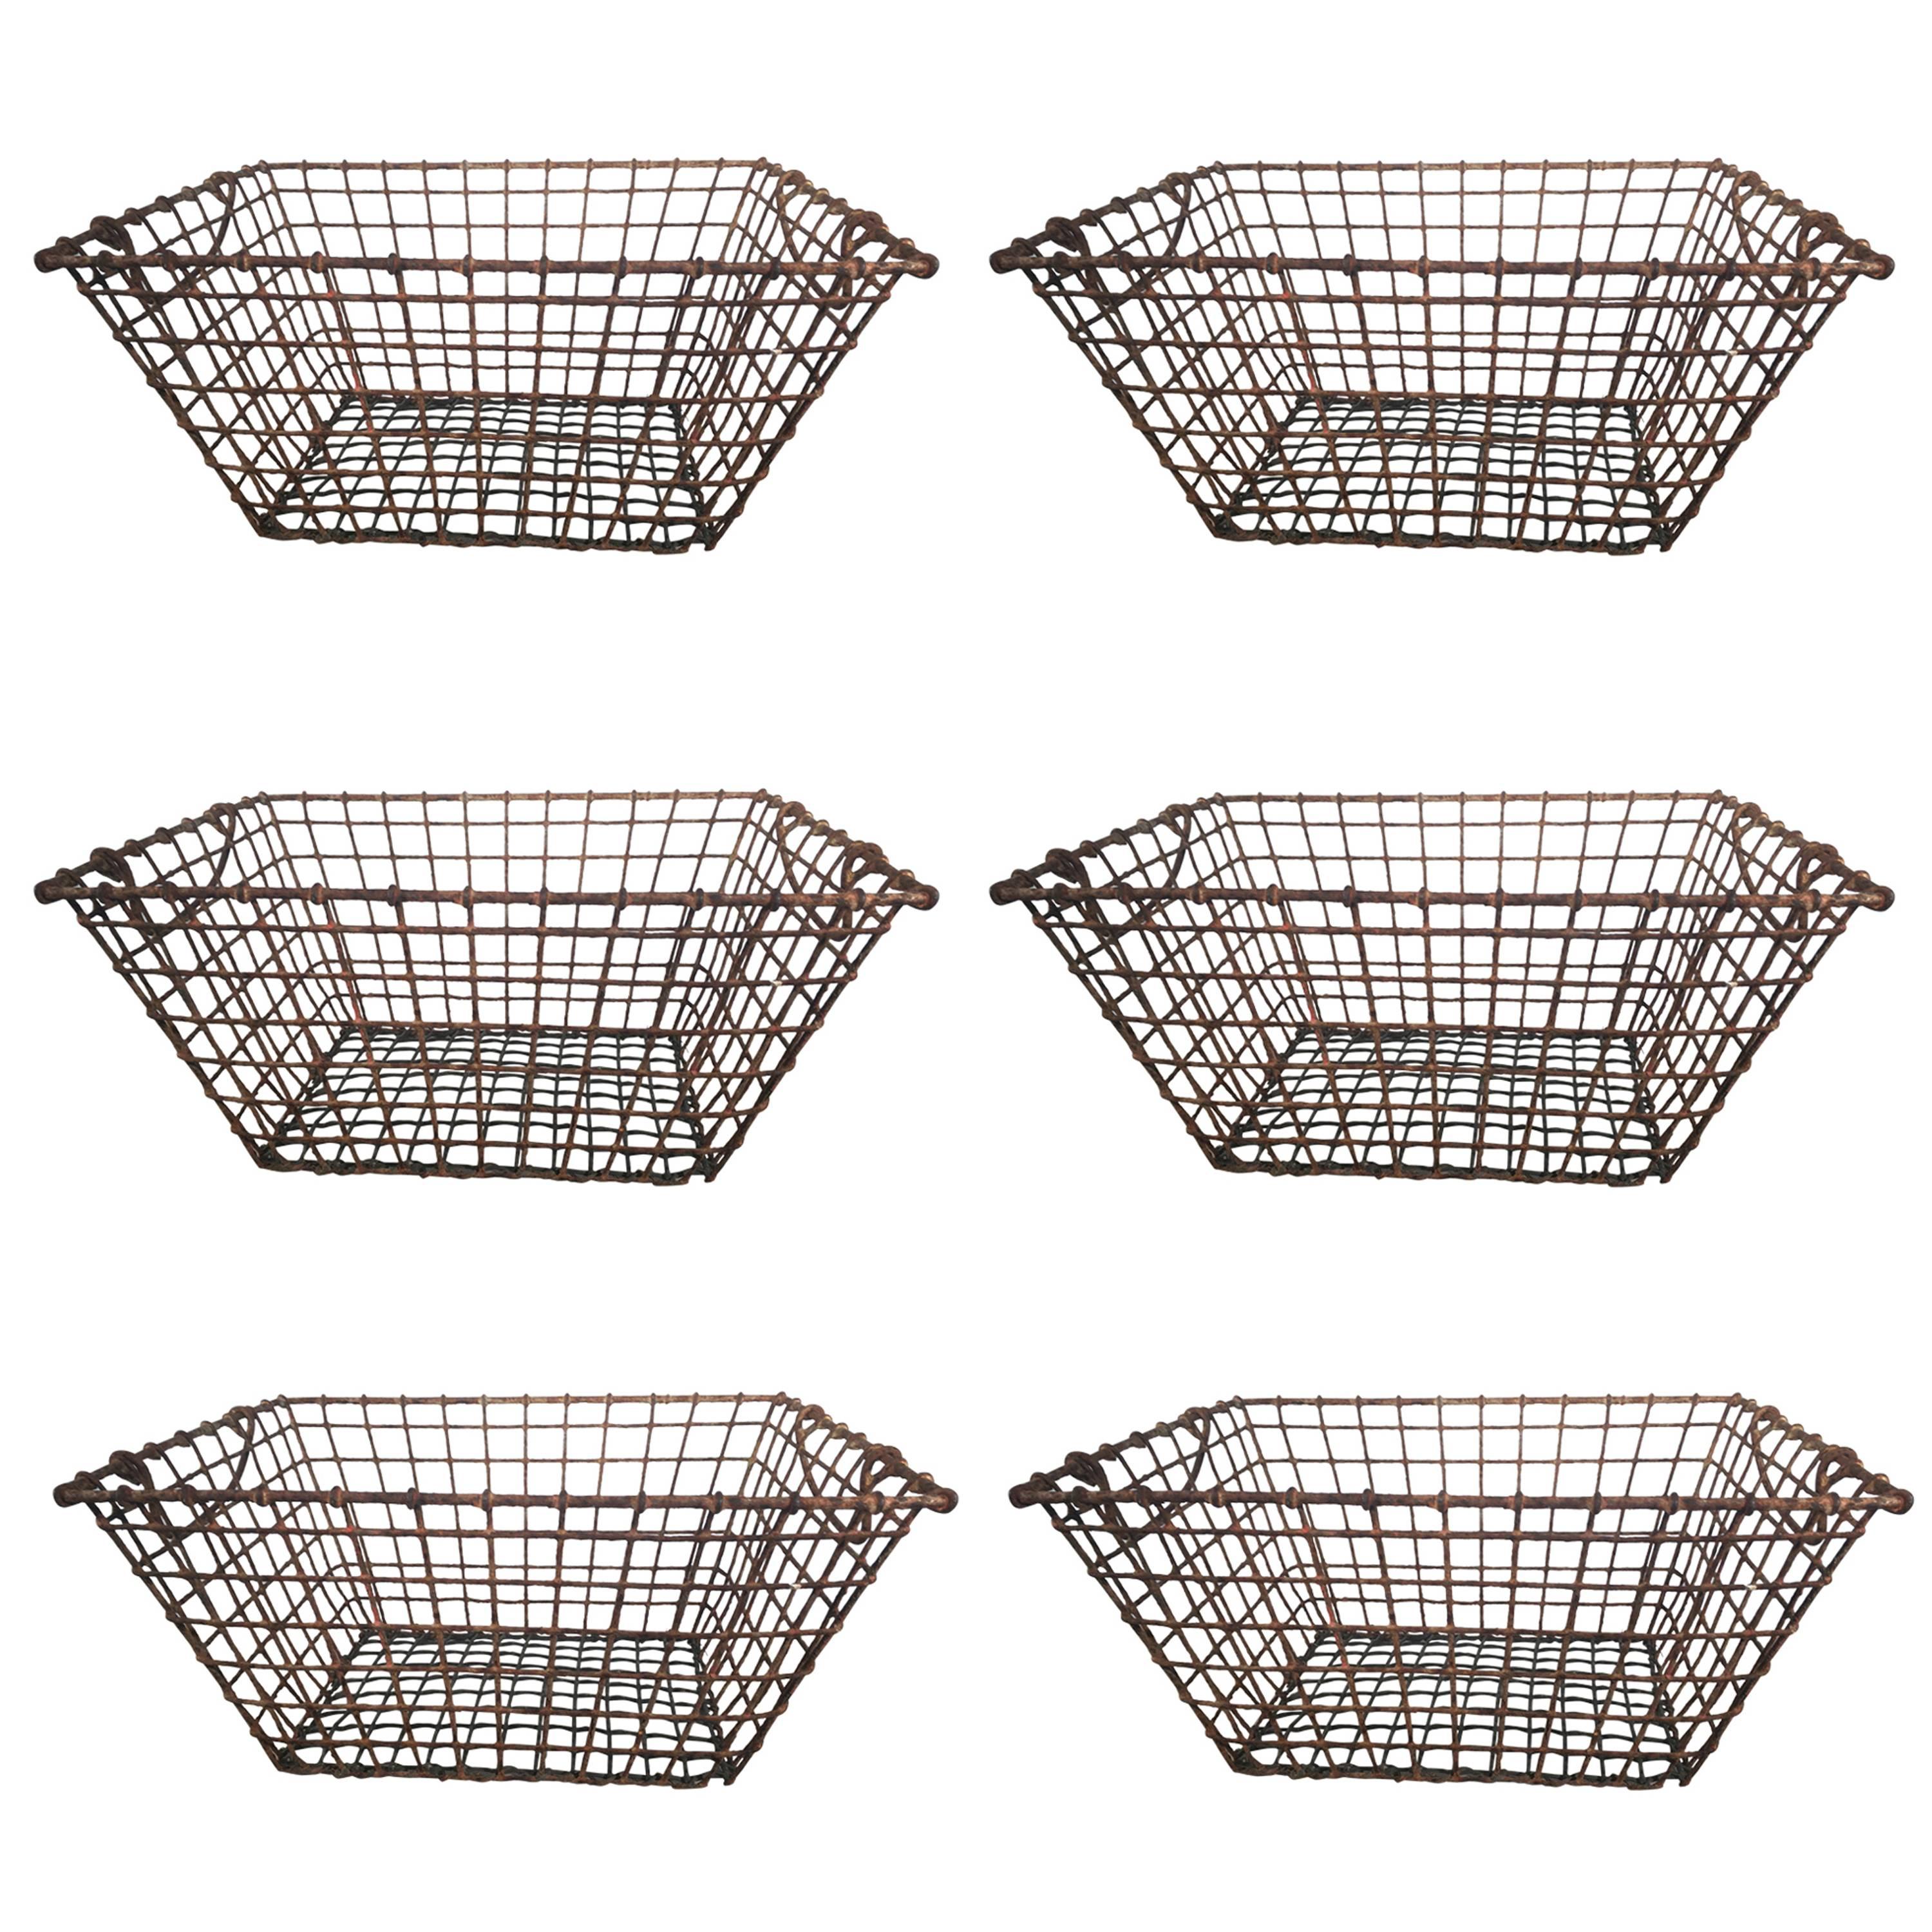 Three Rusty French Stackable French Oyster Baskets